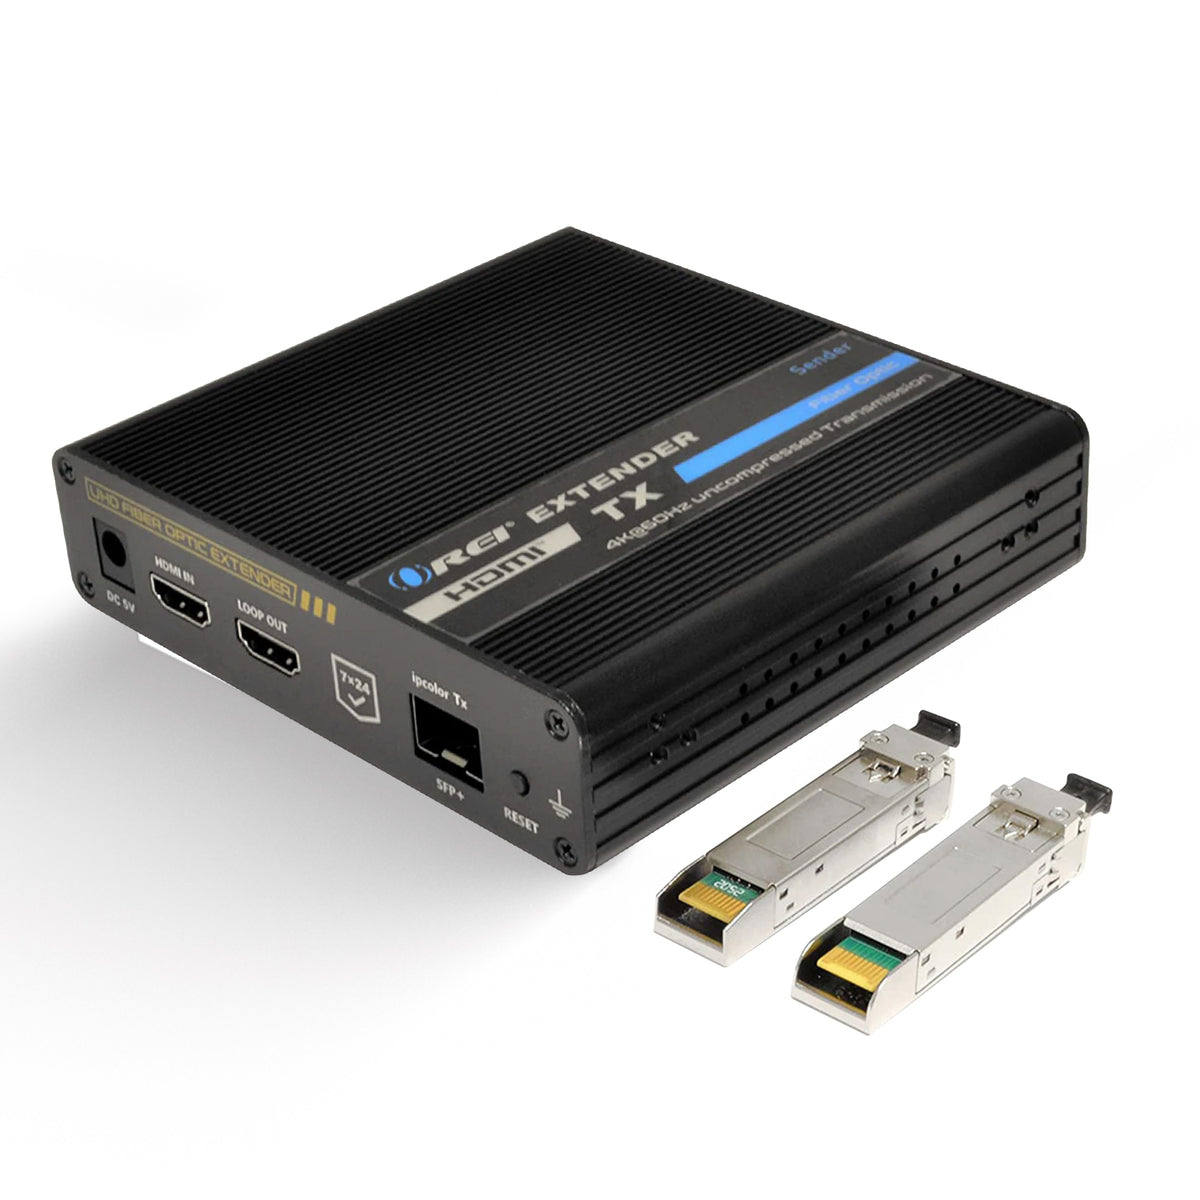 4K120Hz HDMI Extender with IR - up to 132ft(40M) - Nearly zero latency